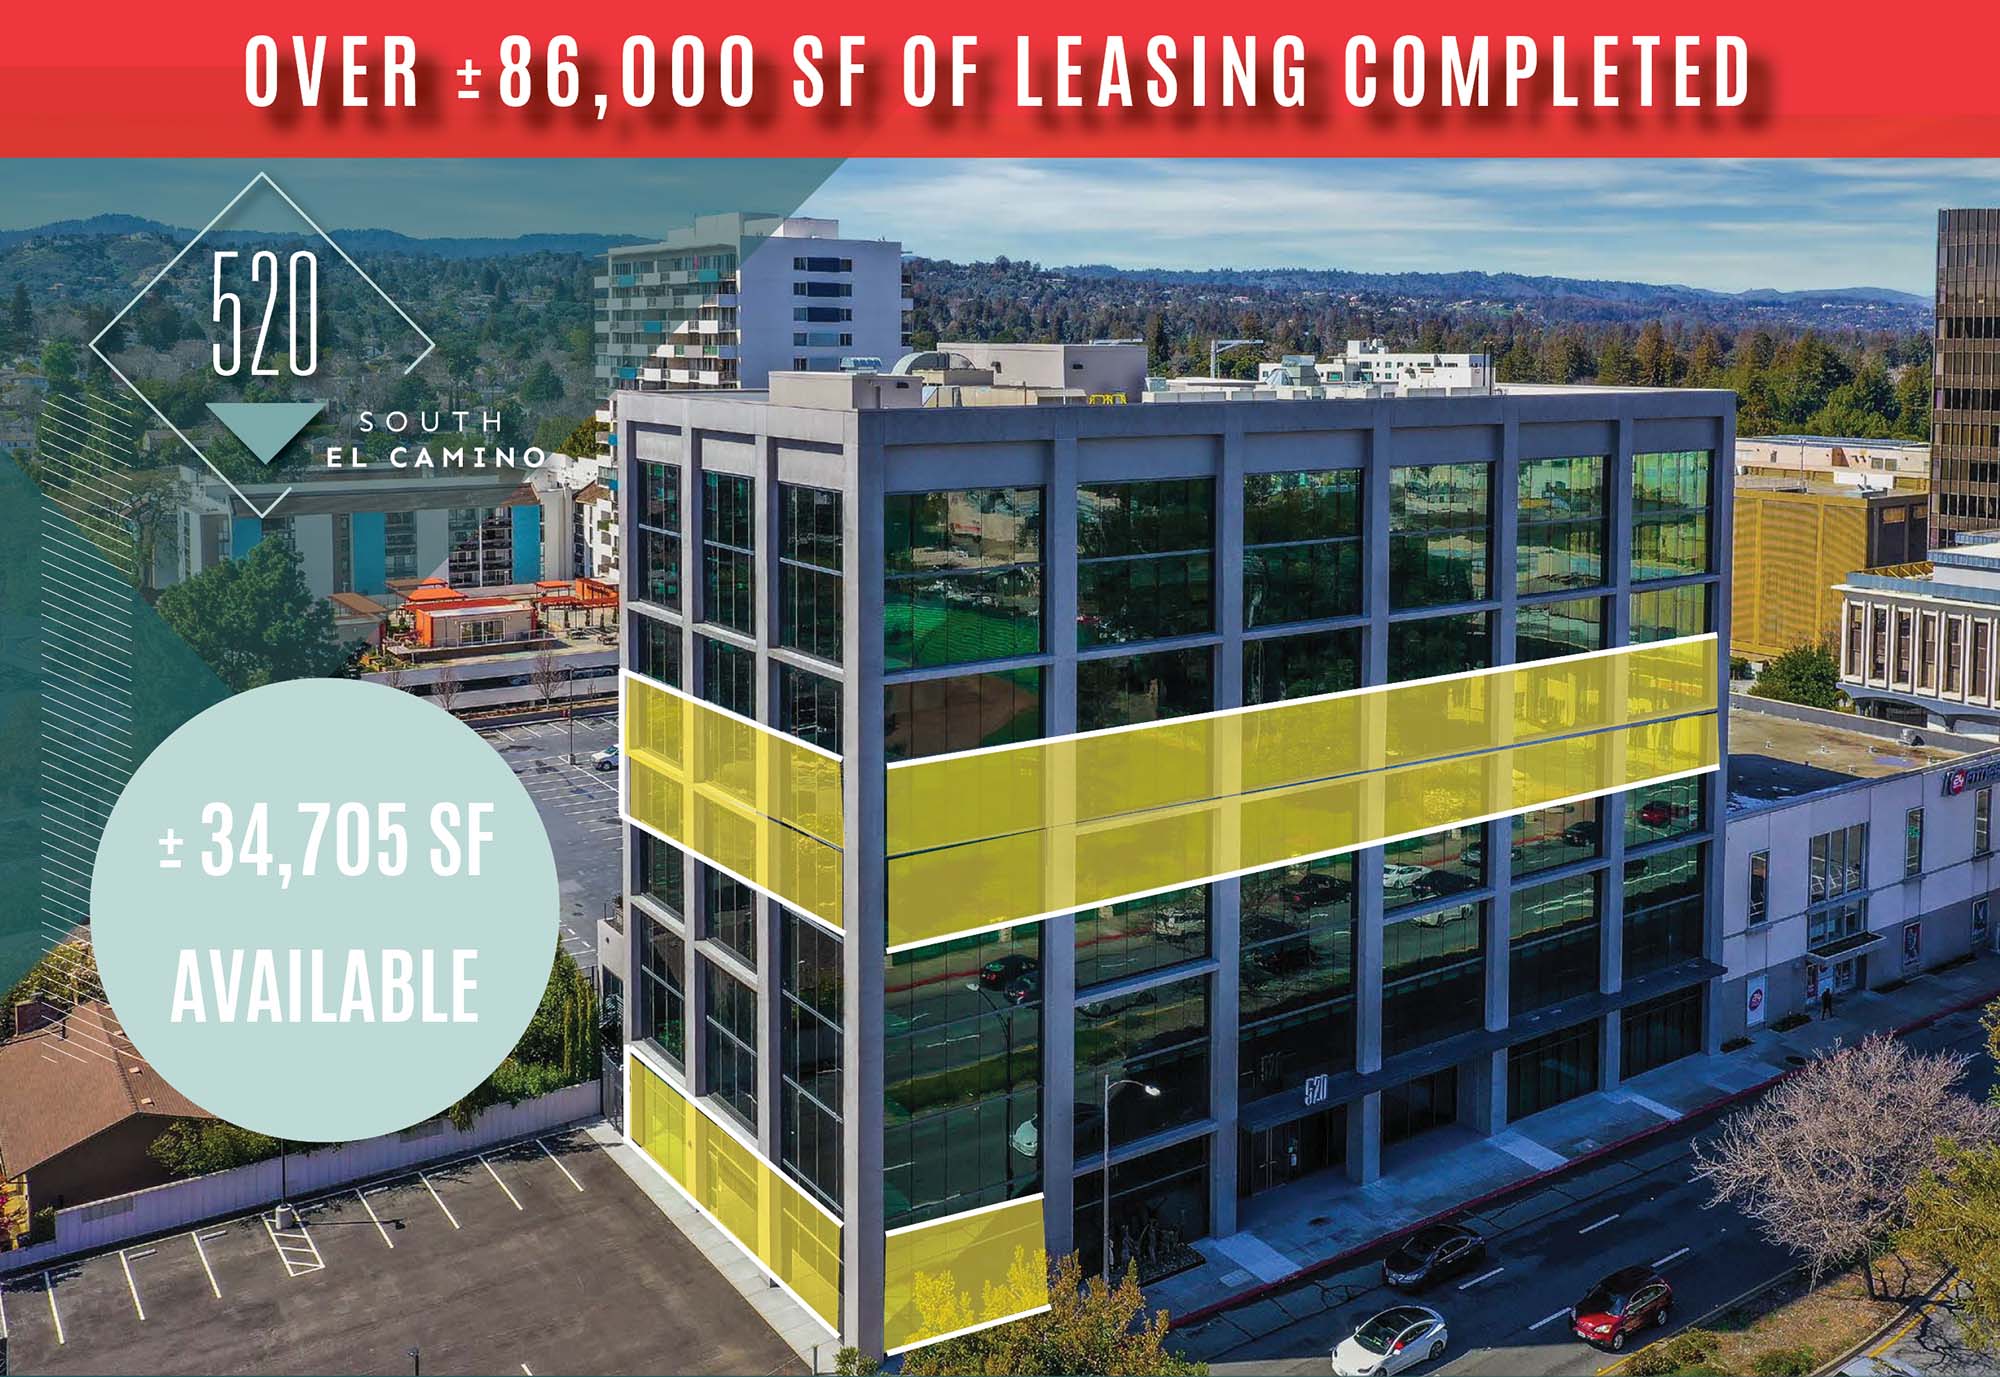 Over 86,000 SF of Leasing Completed